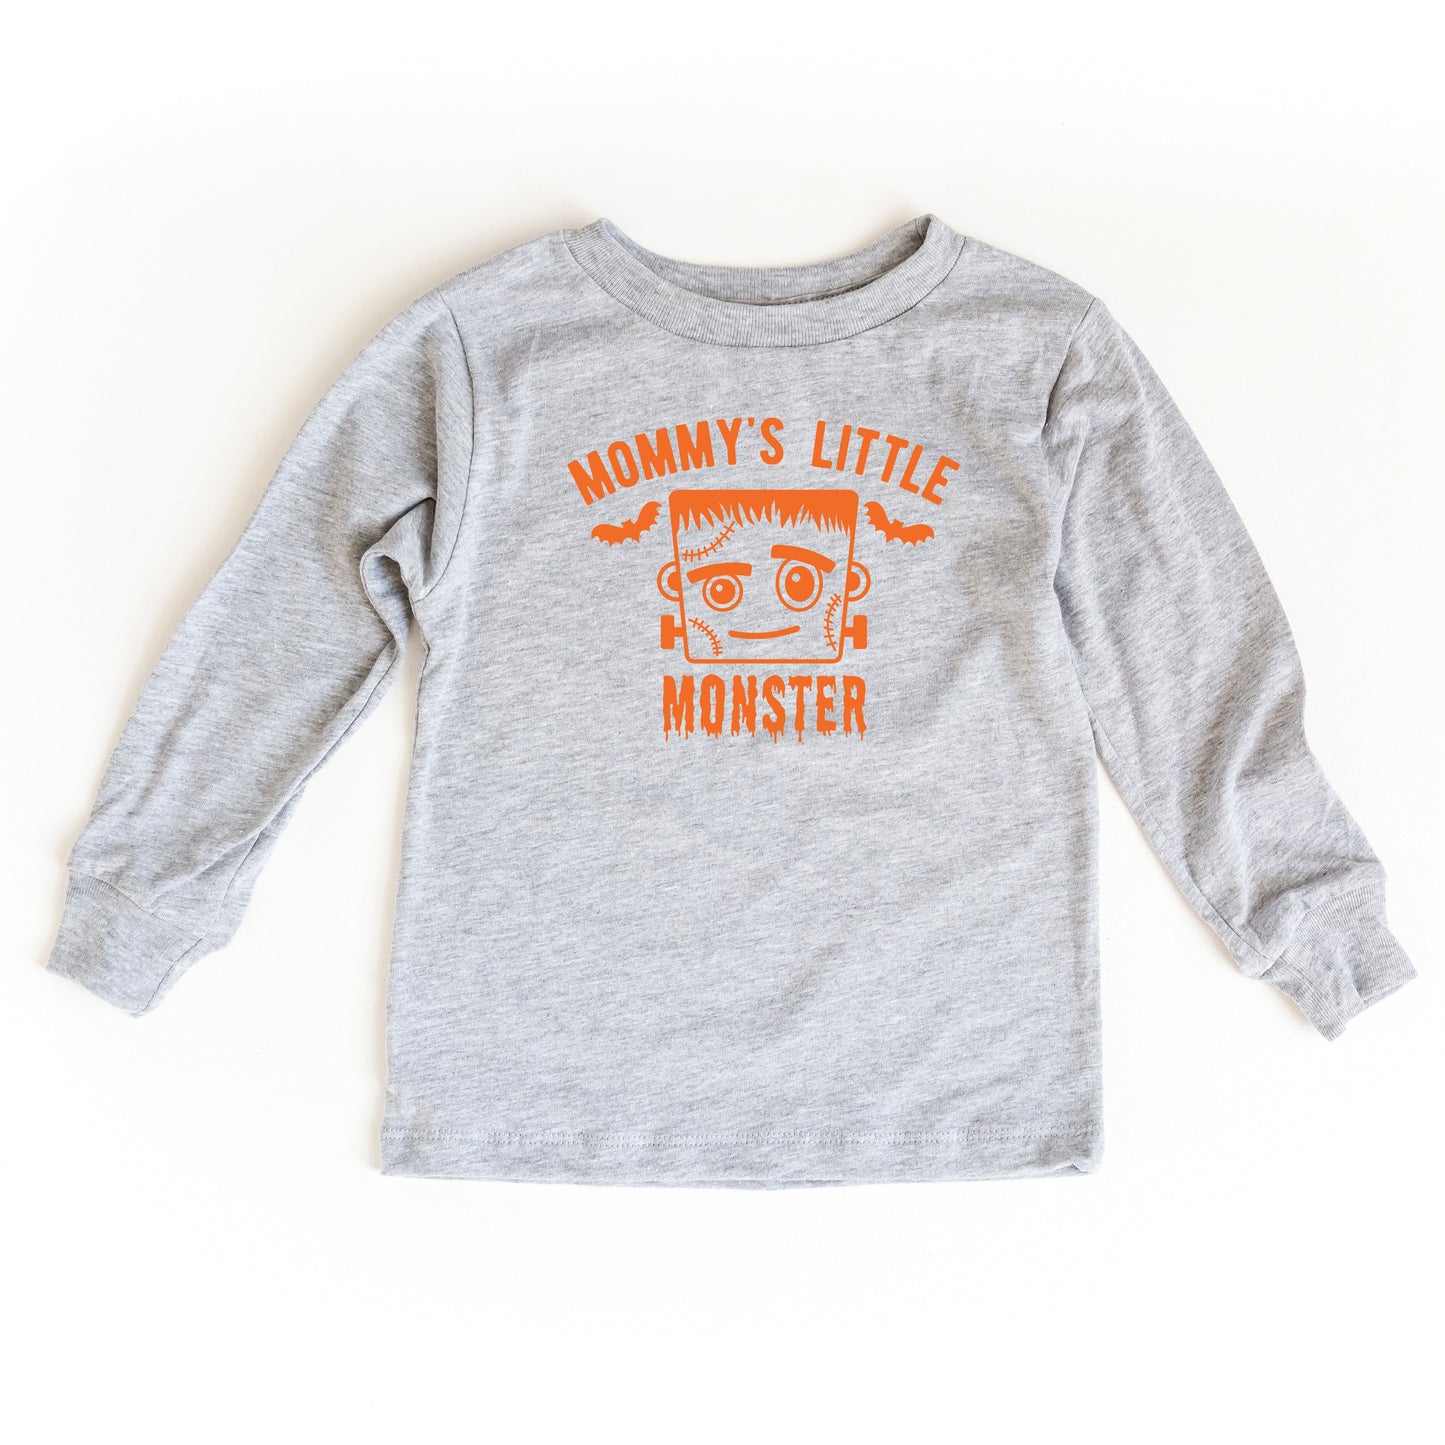 Mommy's Little Monster Boy | Youth Graphic Long Sleeve Tee